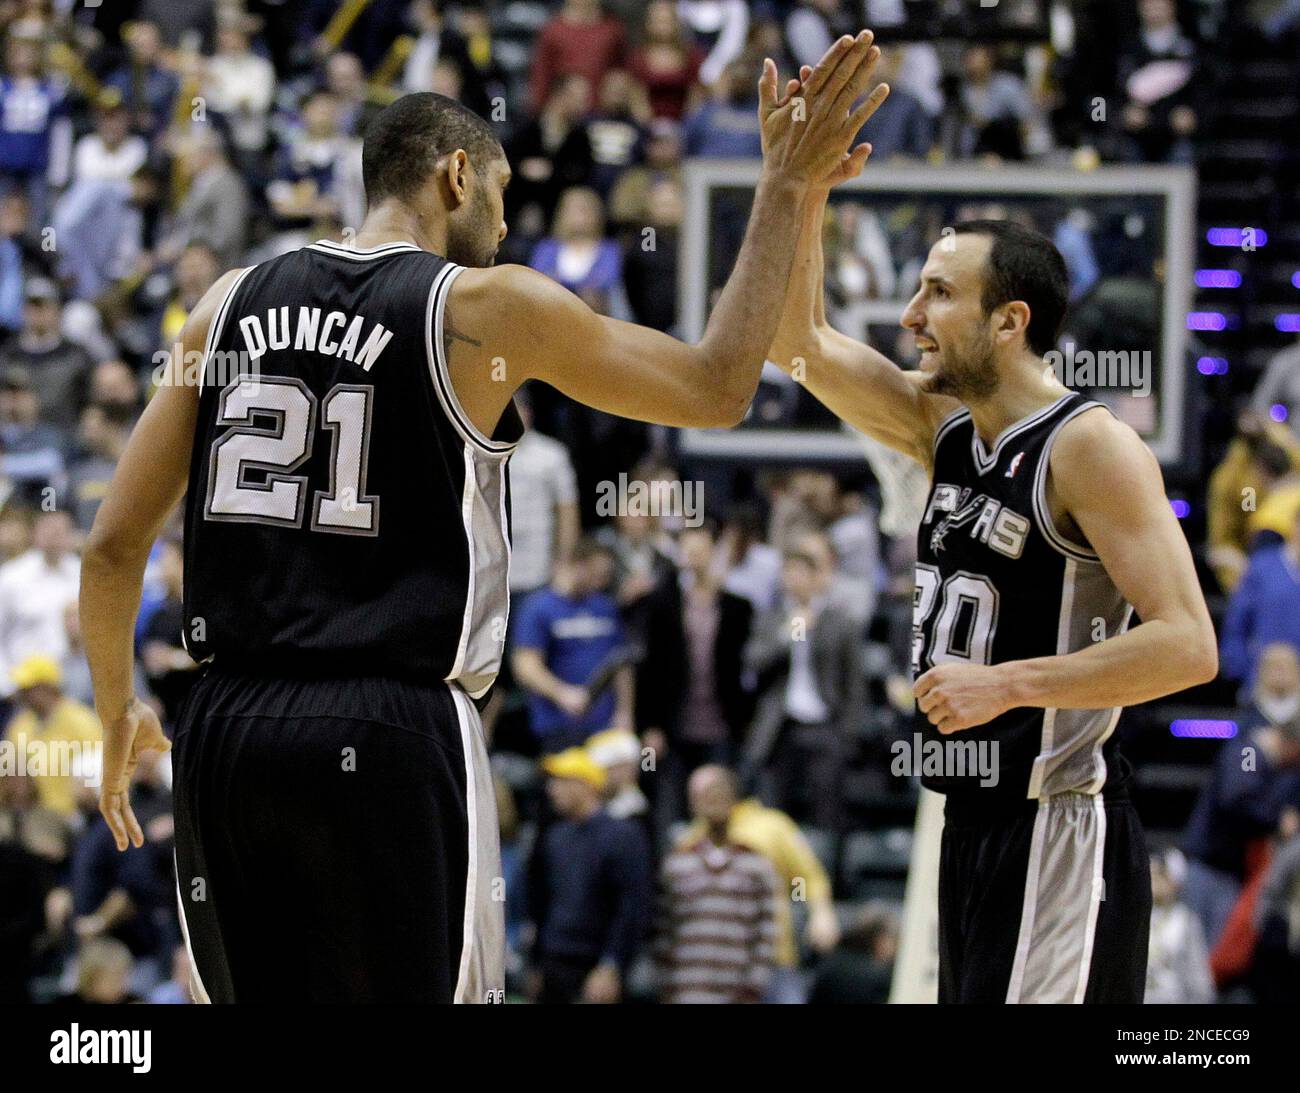 San Antonio Spurs center Tim Duncan, left, and San Antonio Spurs guard Manu Ginobili of Argentina react during the fourth quarter of an NBA basketball game against the Indiana Pacers in Indianapolis, Friday, Jan. 7, 2011. San Antonio won 90-87. (AP Photo/Darron Cummings) Stock Photo